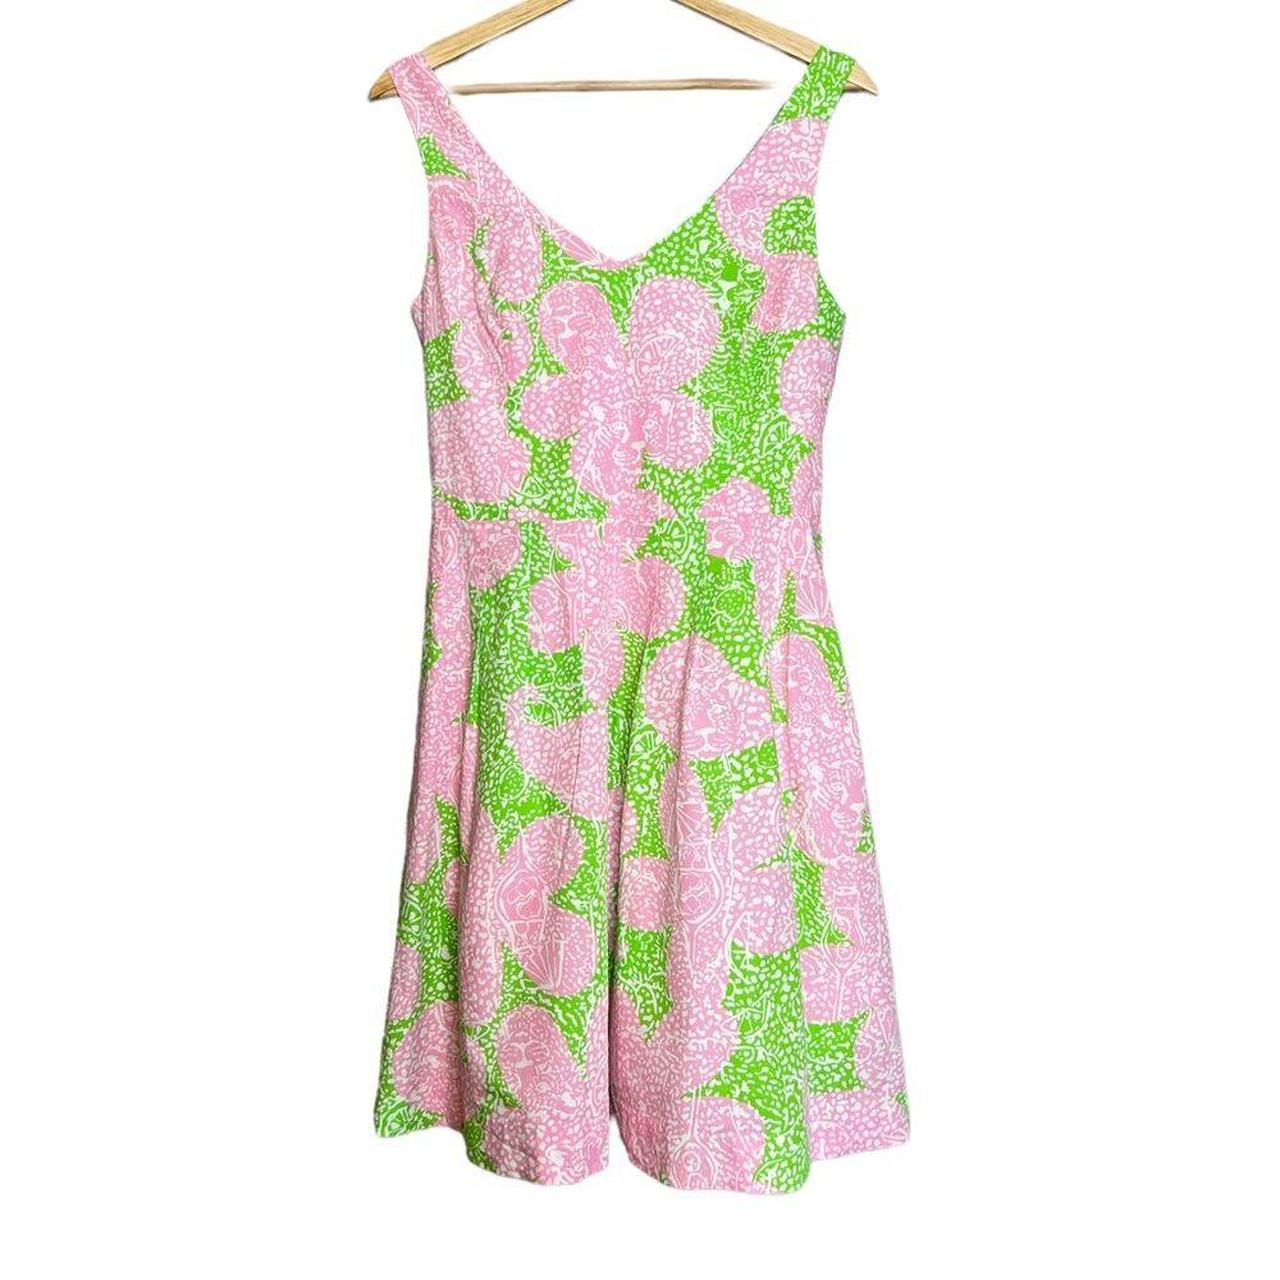 Lilly Pulitzer Women's Green and Pink Dress